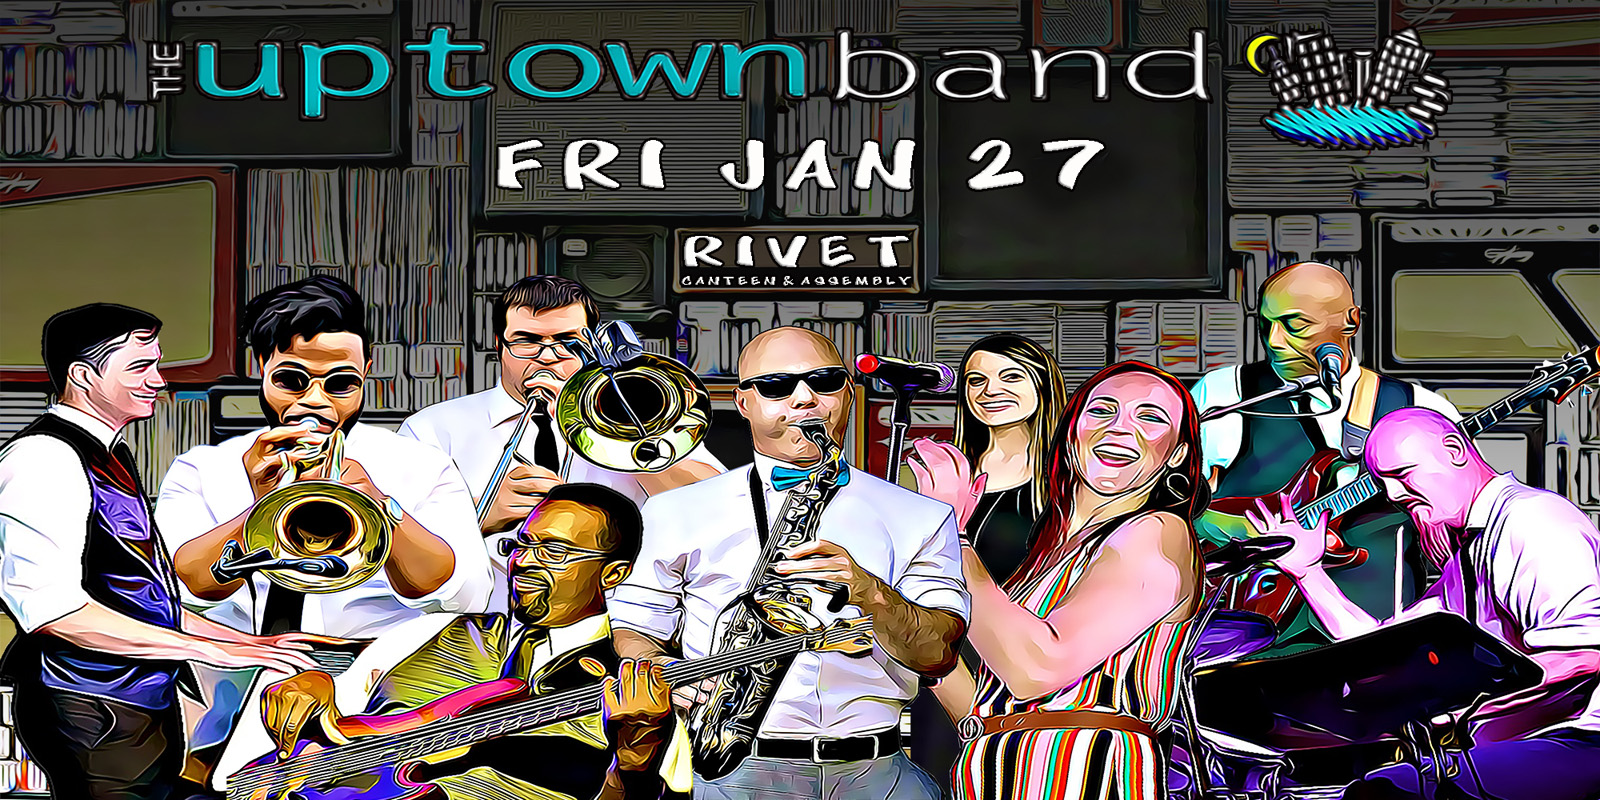 Join us on Friday, January 27th, at Rivet: Canteen & Assembly for an amazing night of music, dancing, and fantastic drinks with Erich Cawalla & The Uptown Band!